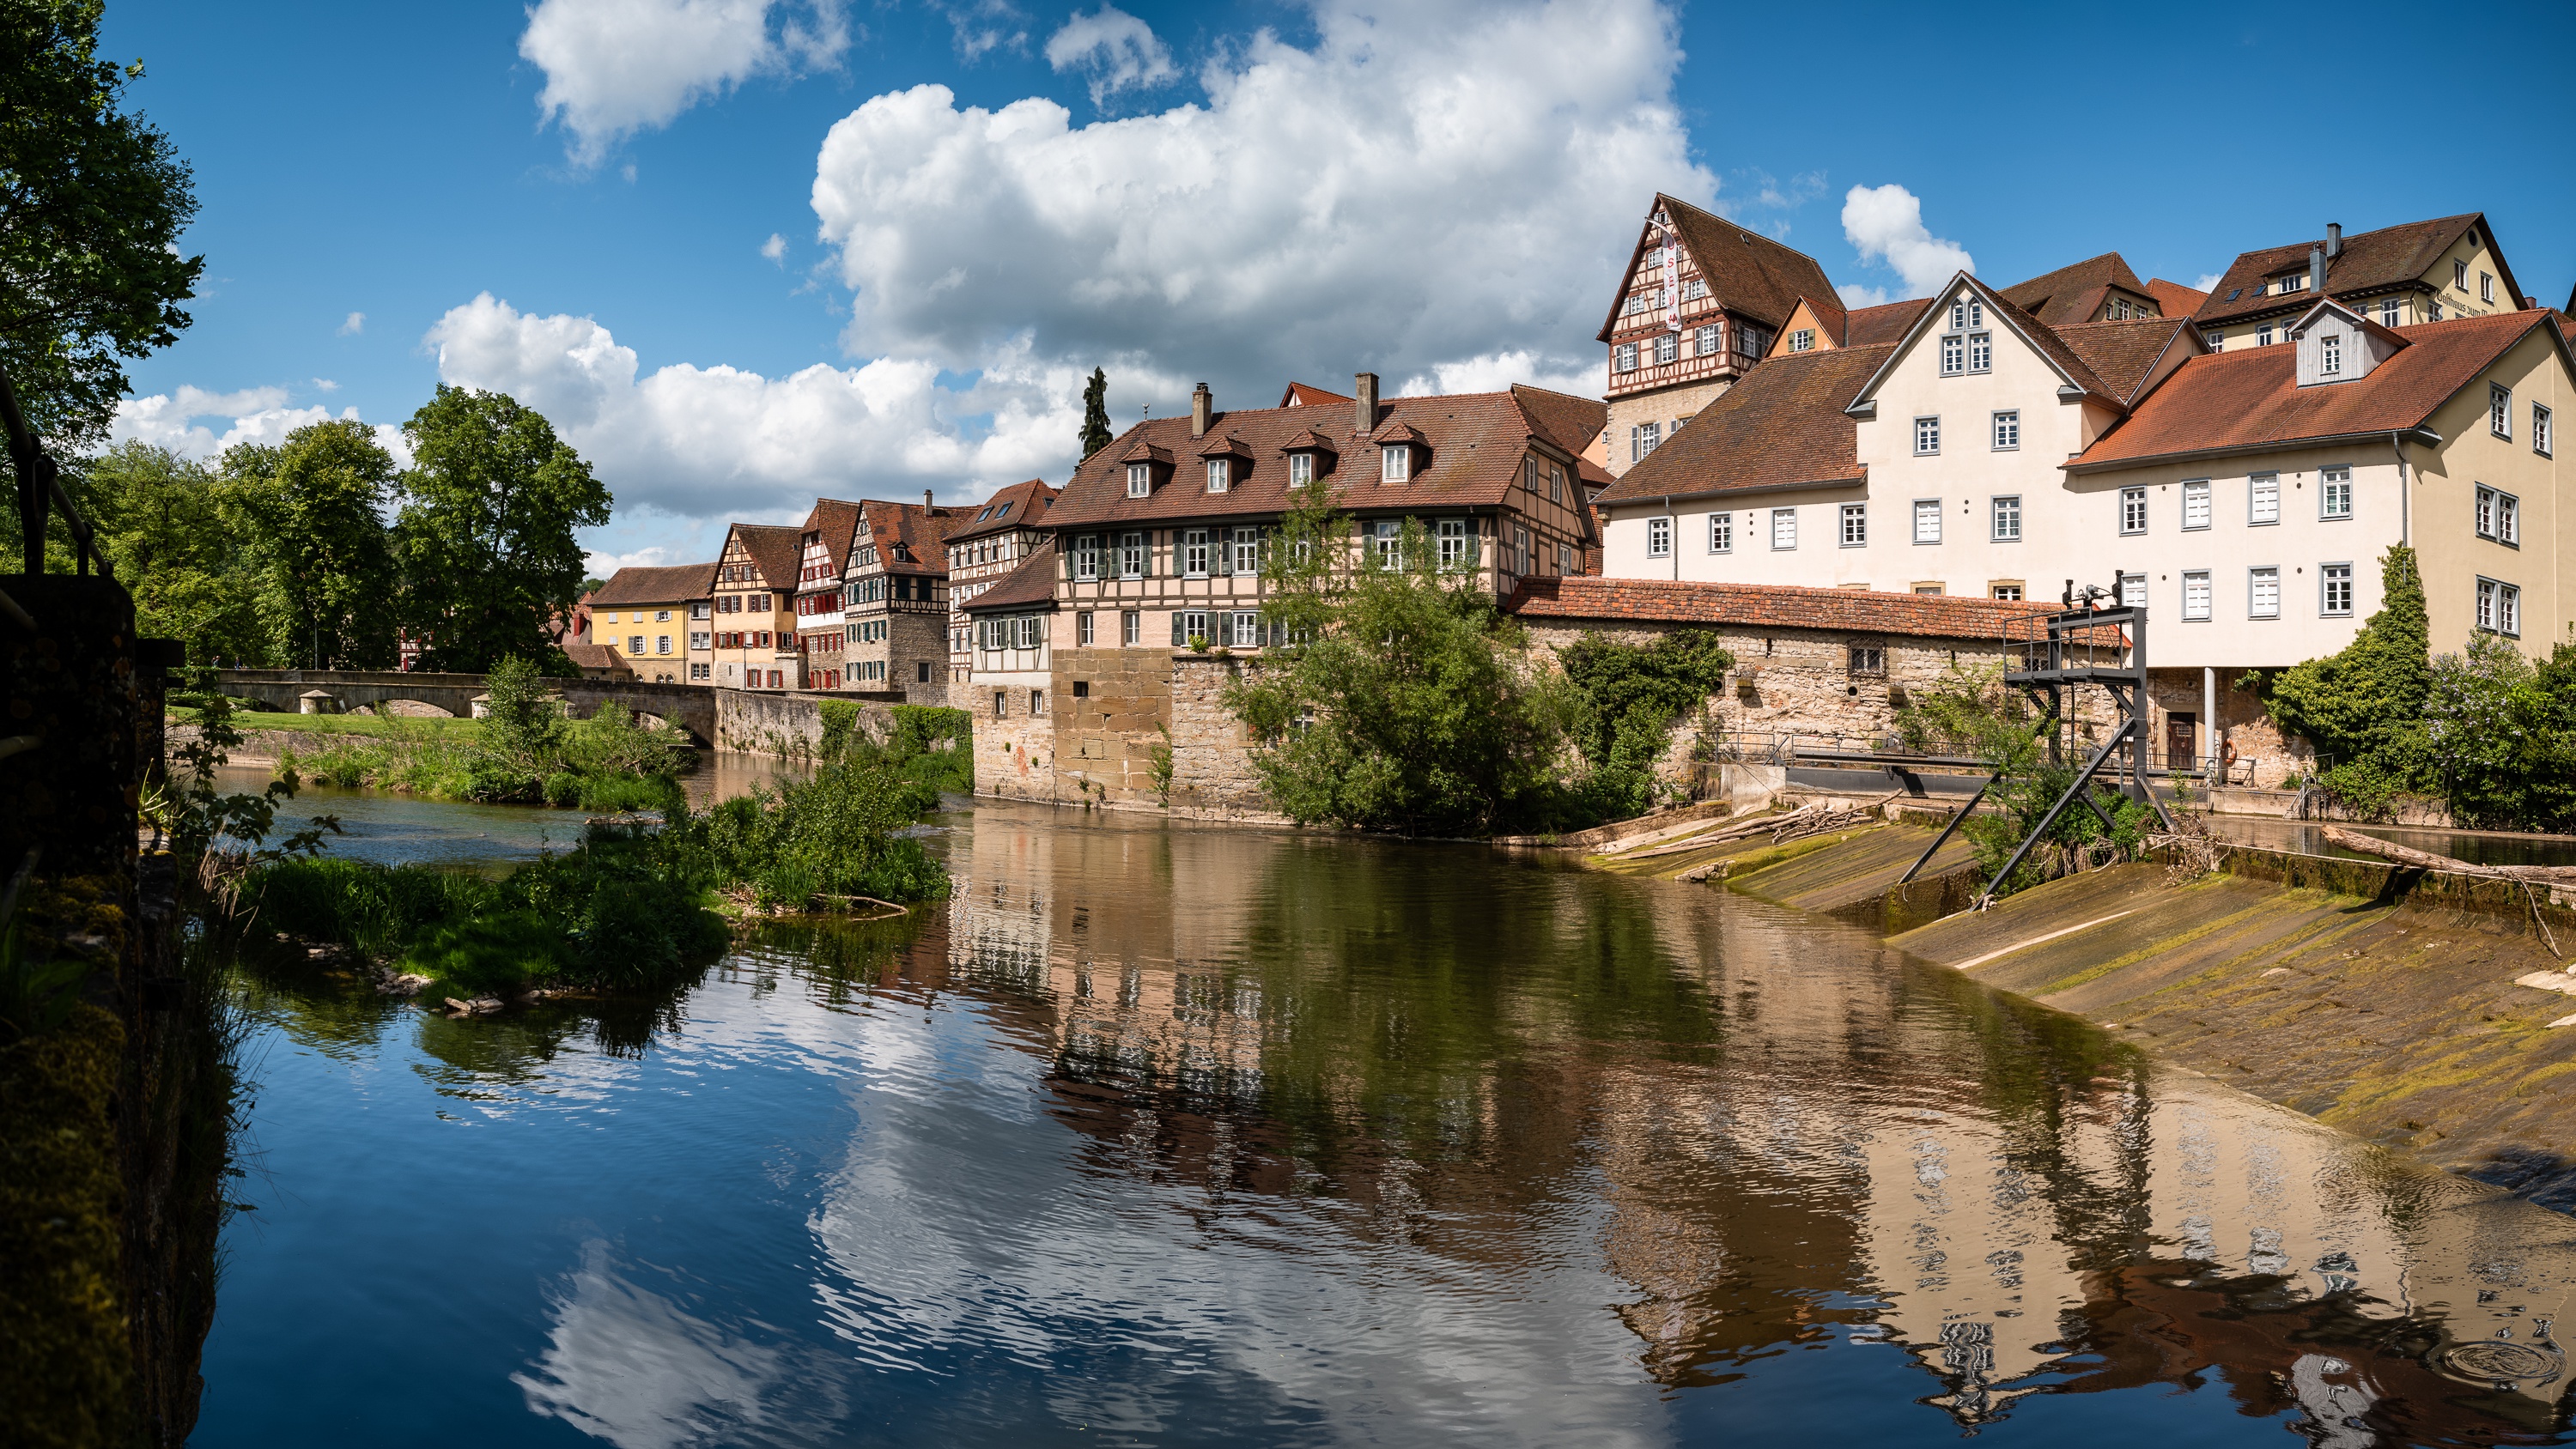 man made, town, baden württemberg, cloud, germany, house, reflection, river, towns